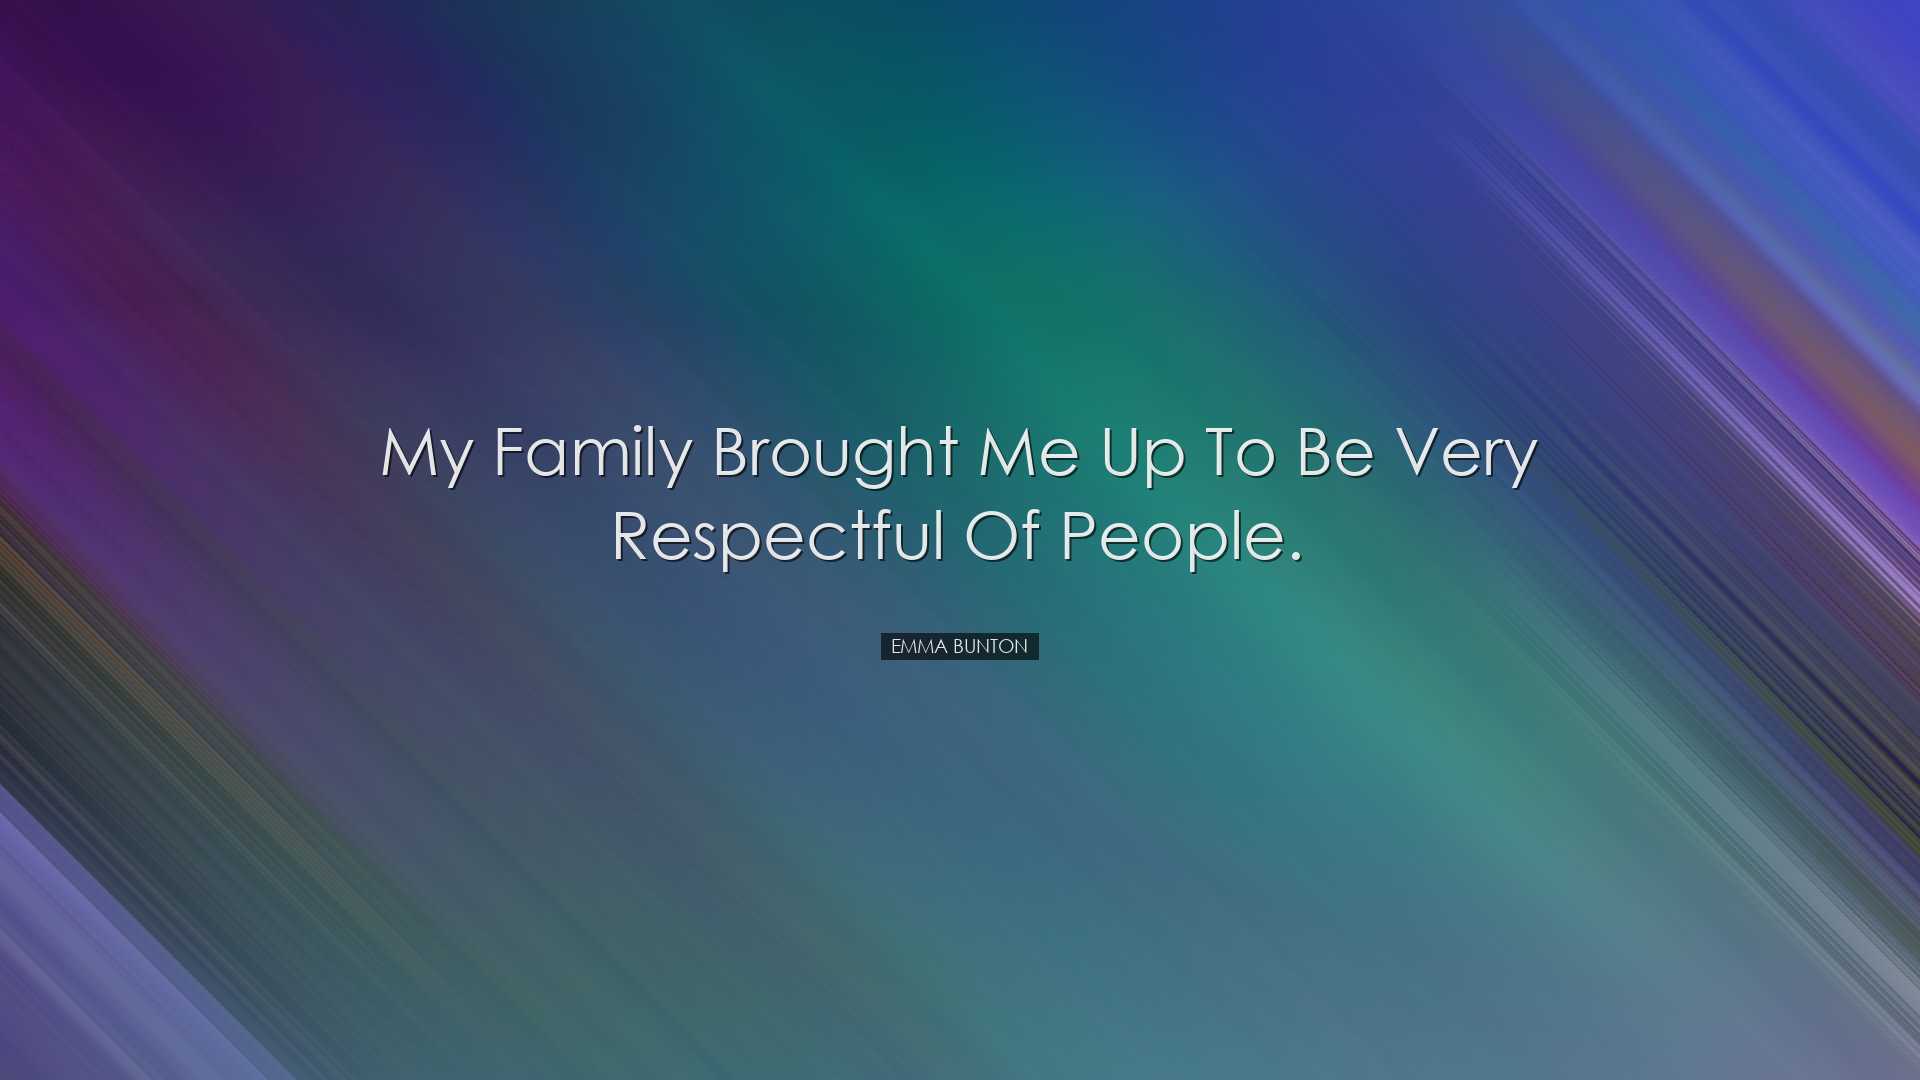 My family brought me up to be very respectful of people. - Emma Bu